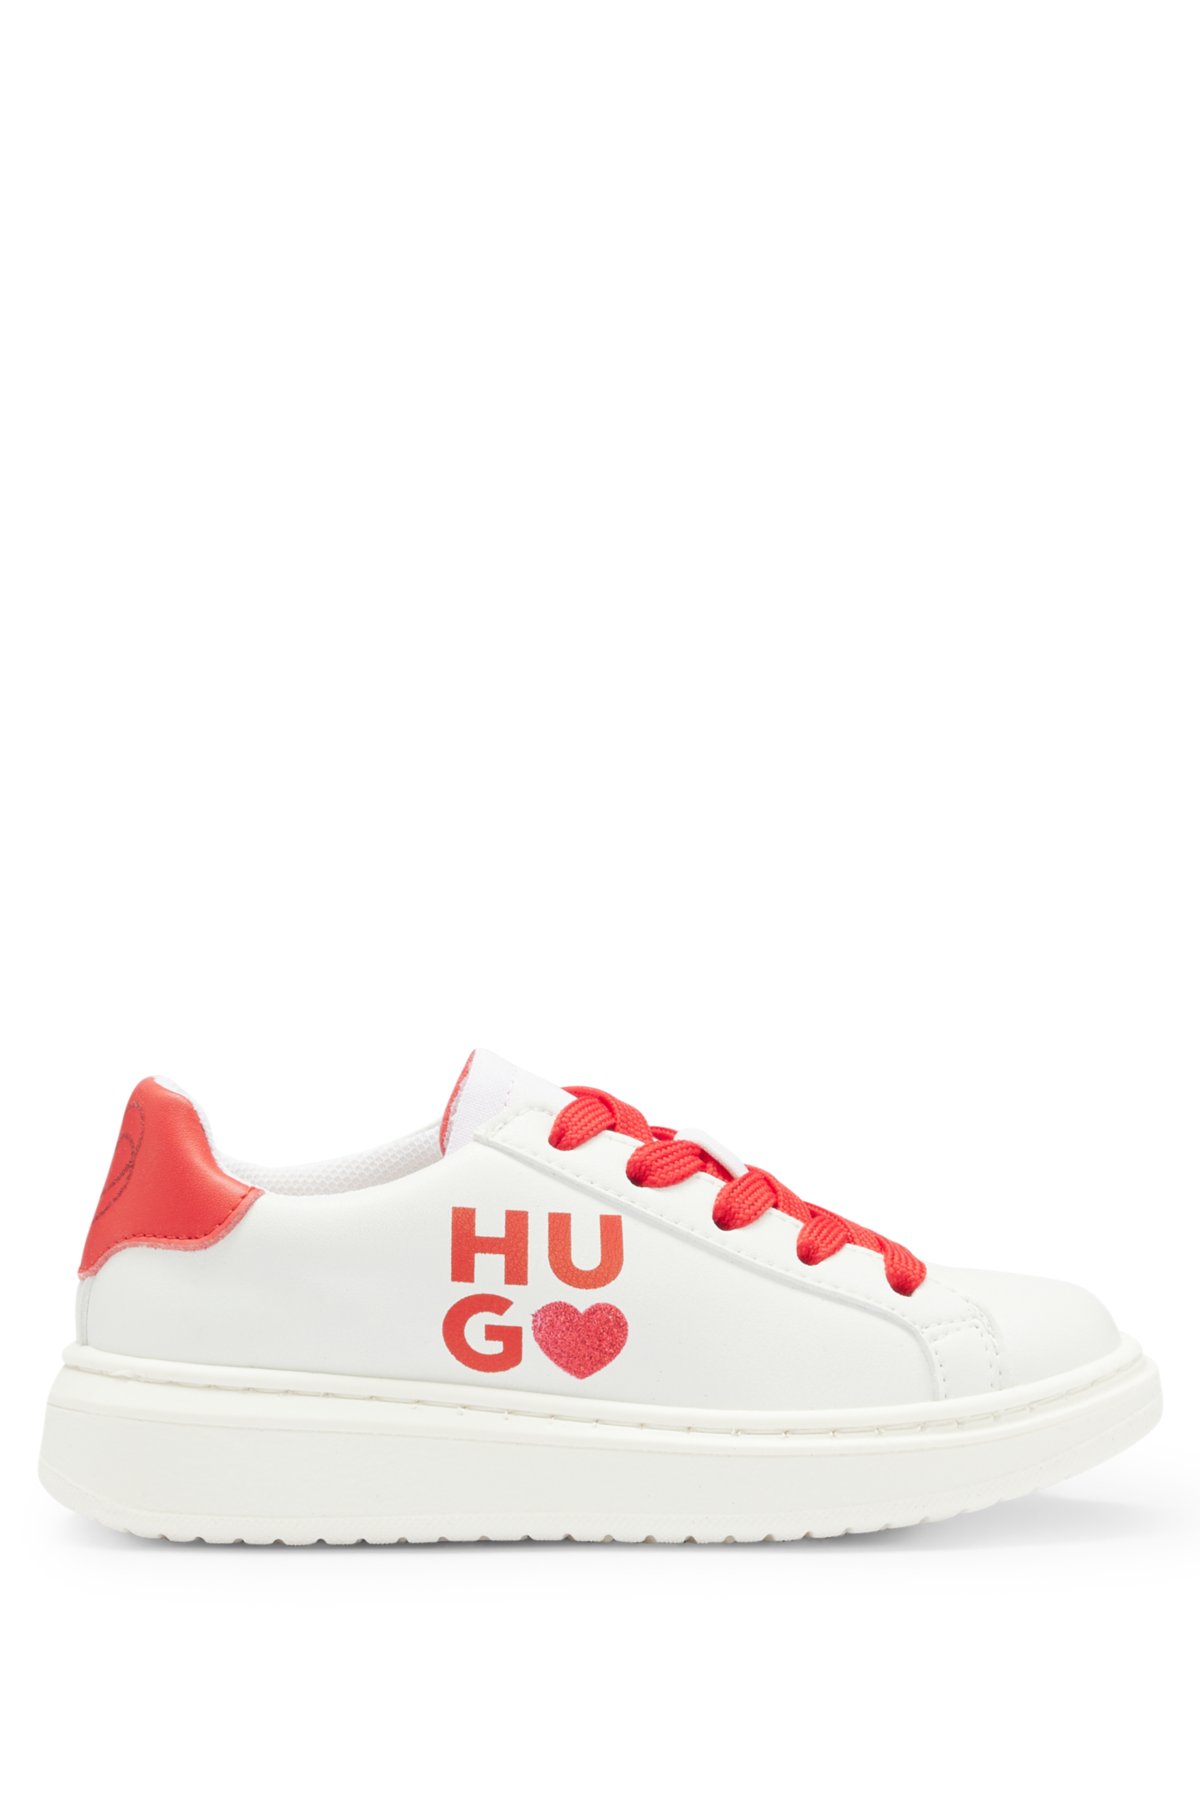 Kids' faux-leather trainers with glittery branding, White